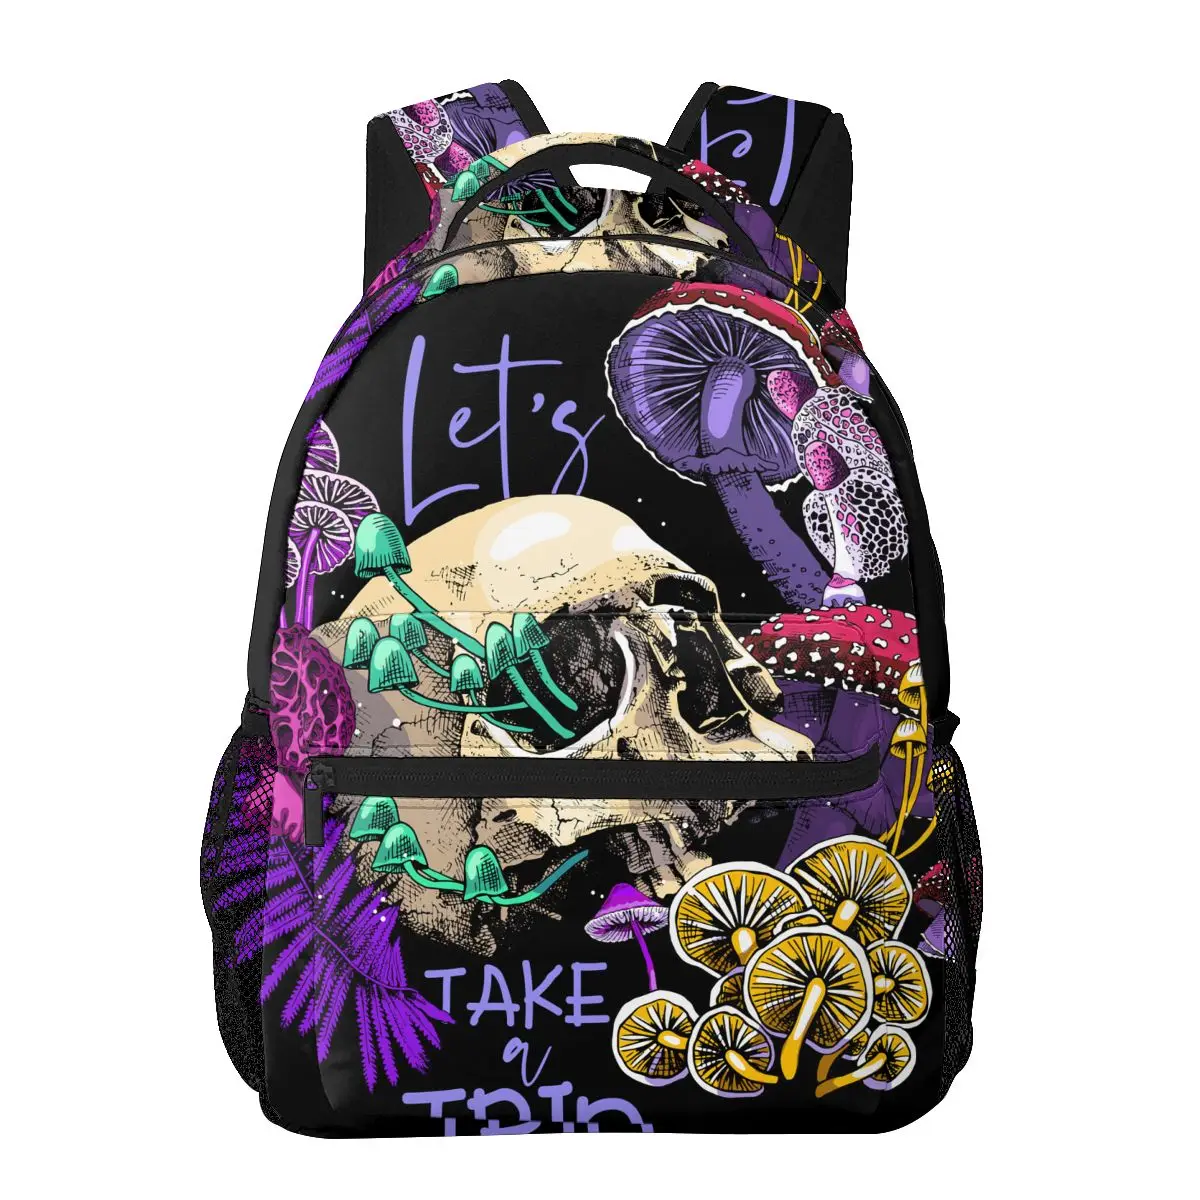 Men Woman Backpack Magic Psychedelic Mushrooms And Skulls Schoolbag for Female Male 2022 Fashion Bag Student Bookpack